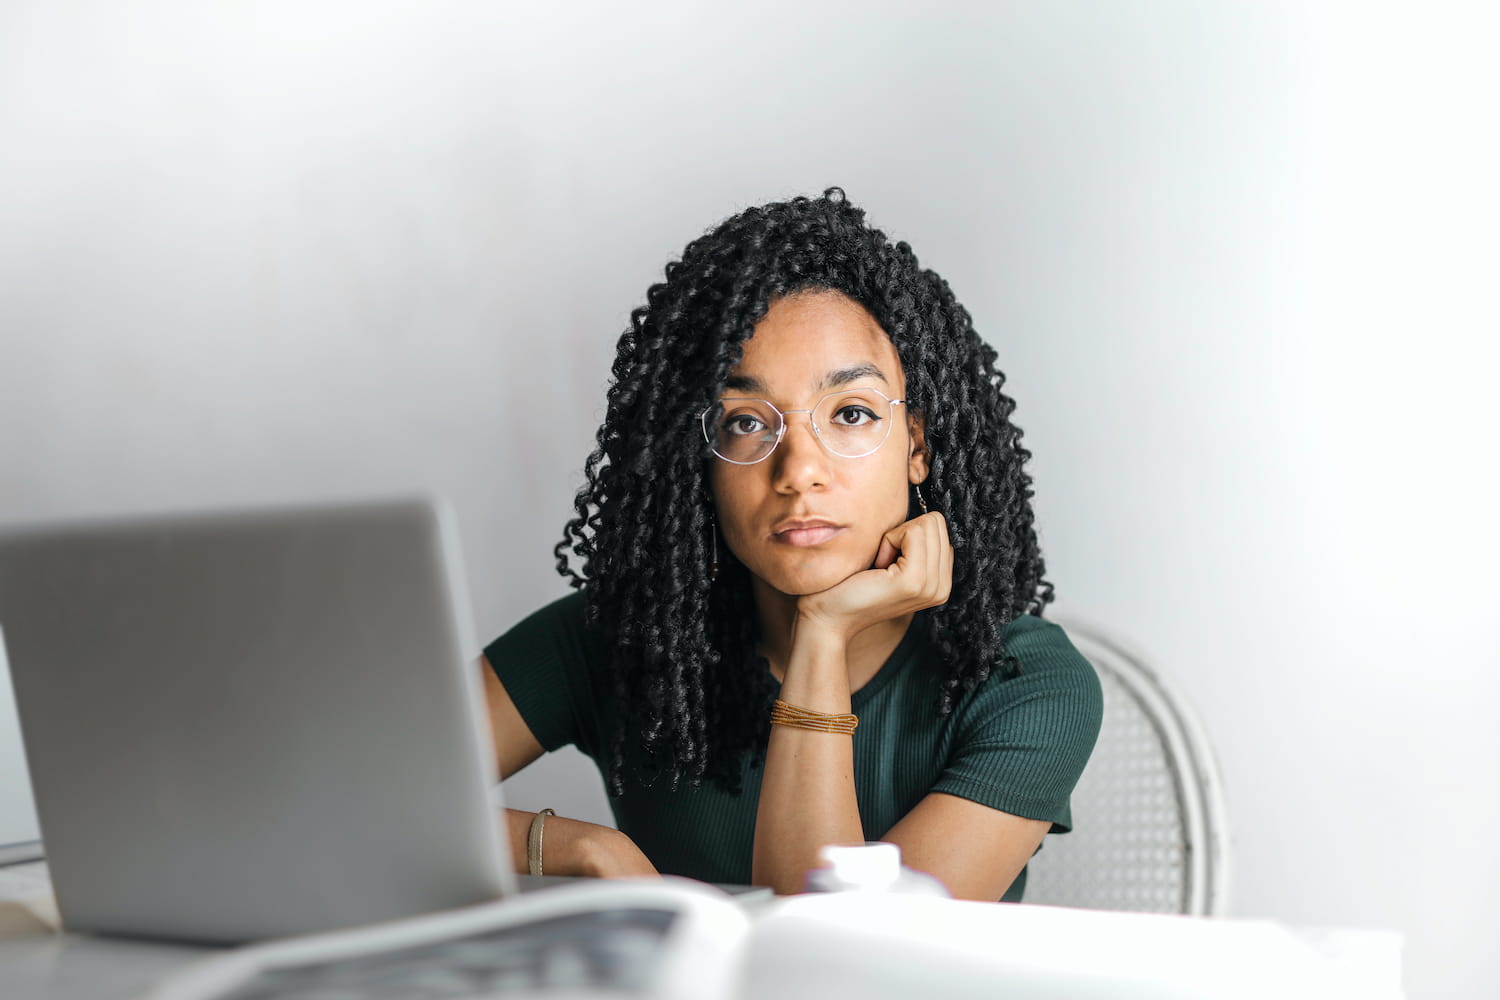  young black woman working at laptop